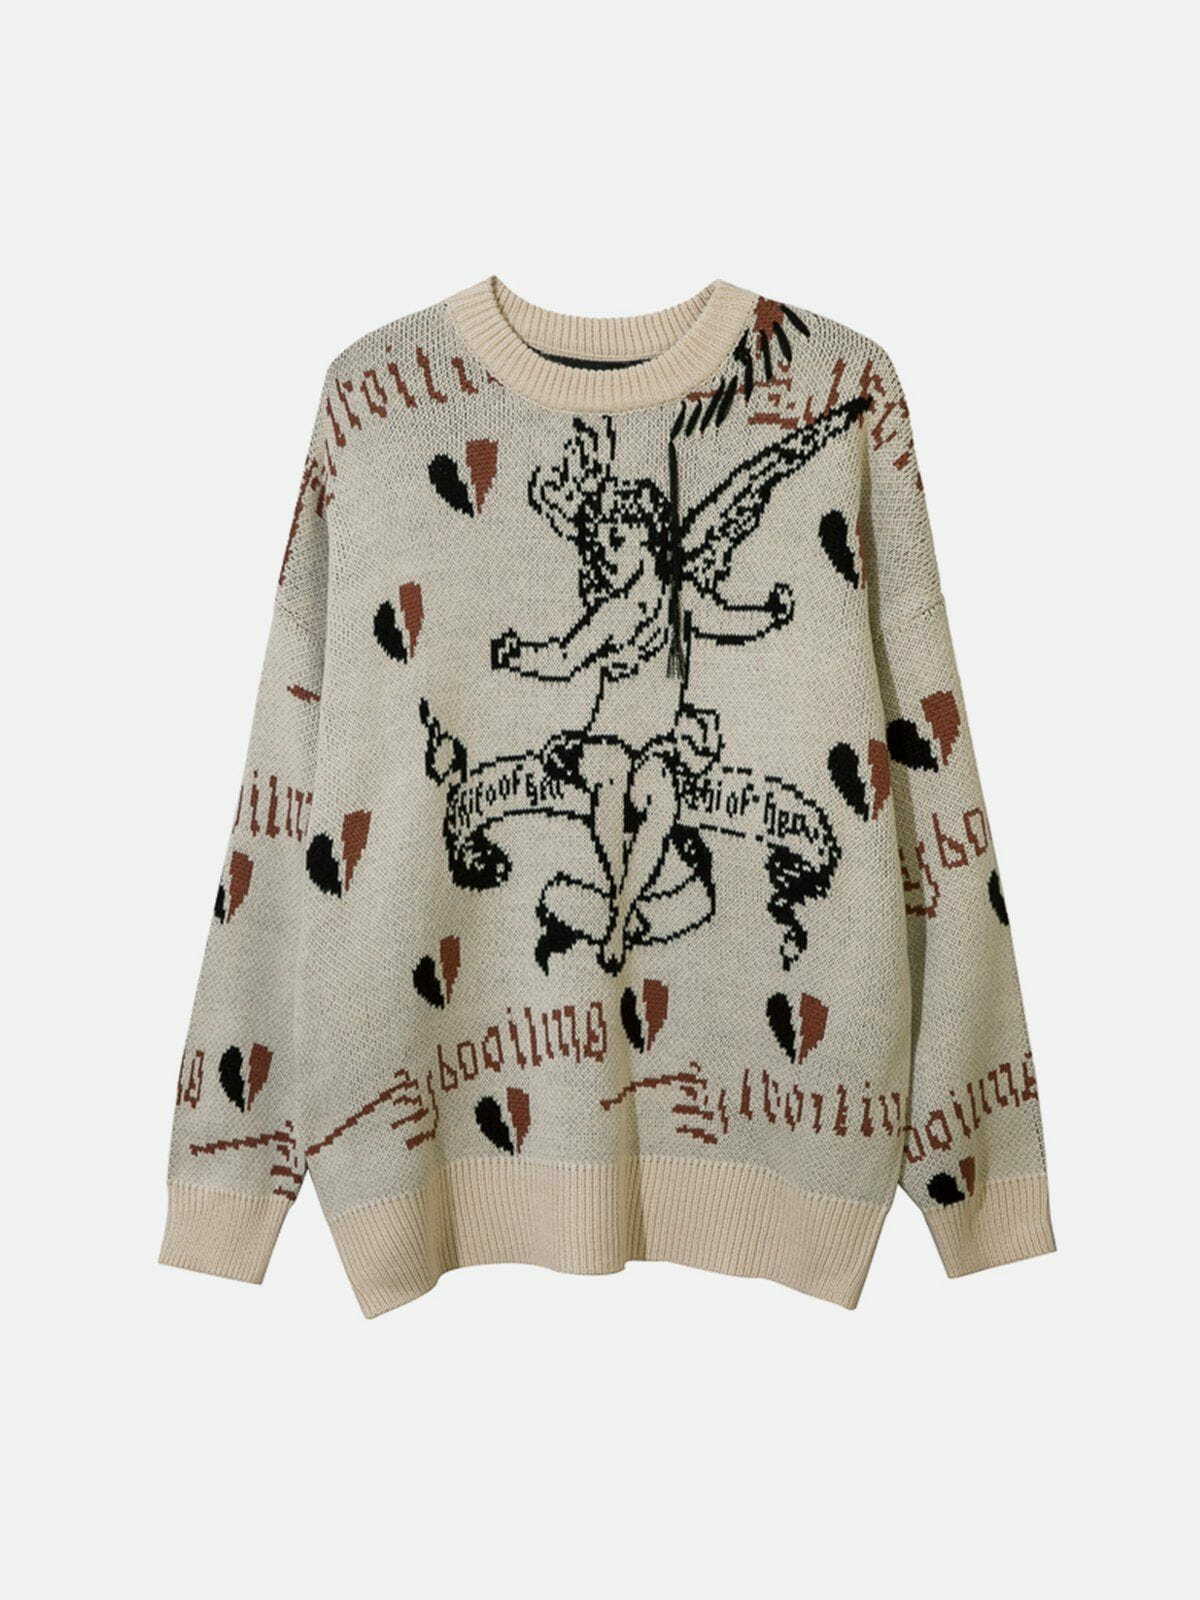 cupid embroidered sweater romantic & chic streetwear 1108